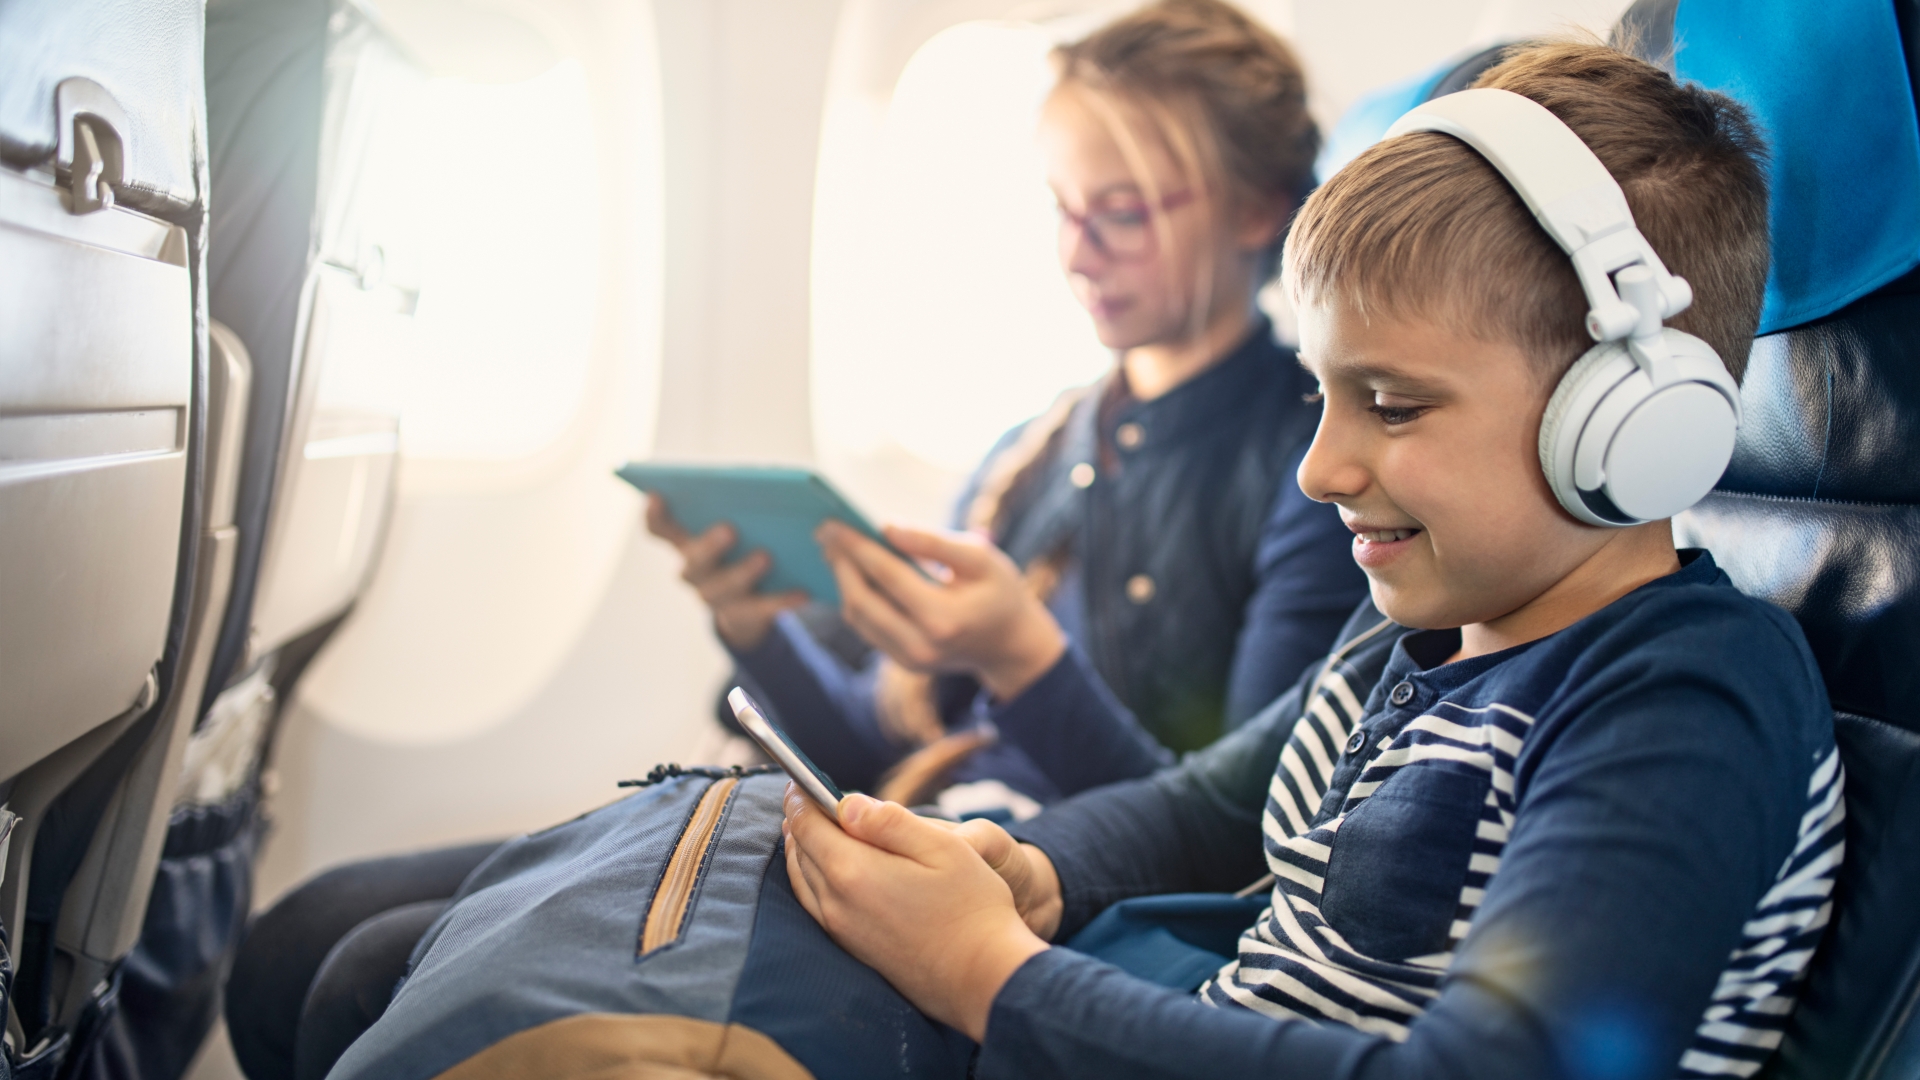 Mum reveals the simple way she keeps her toddlers entertained on long flights